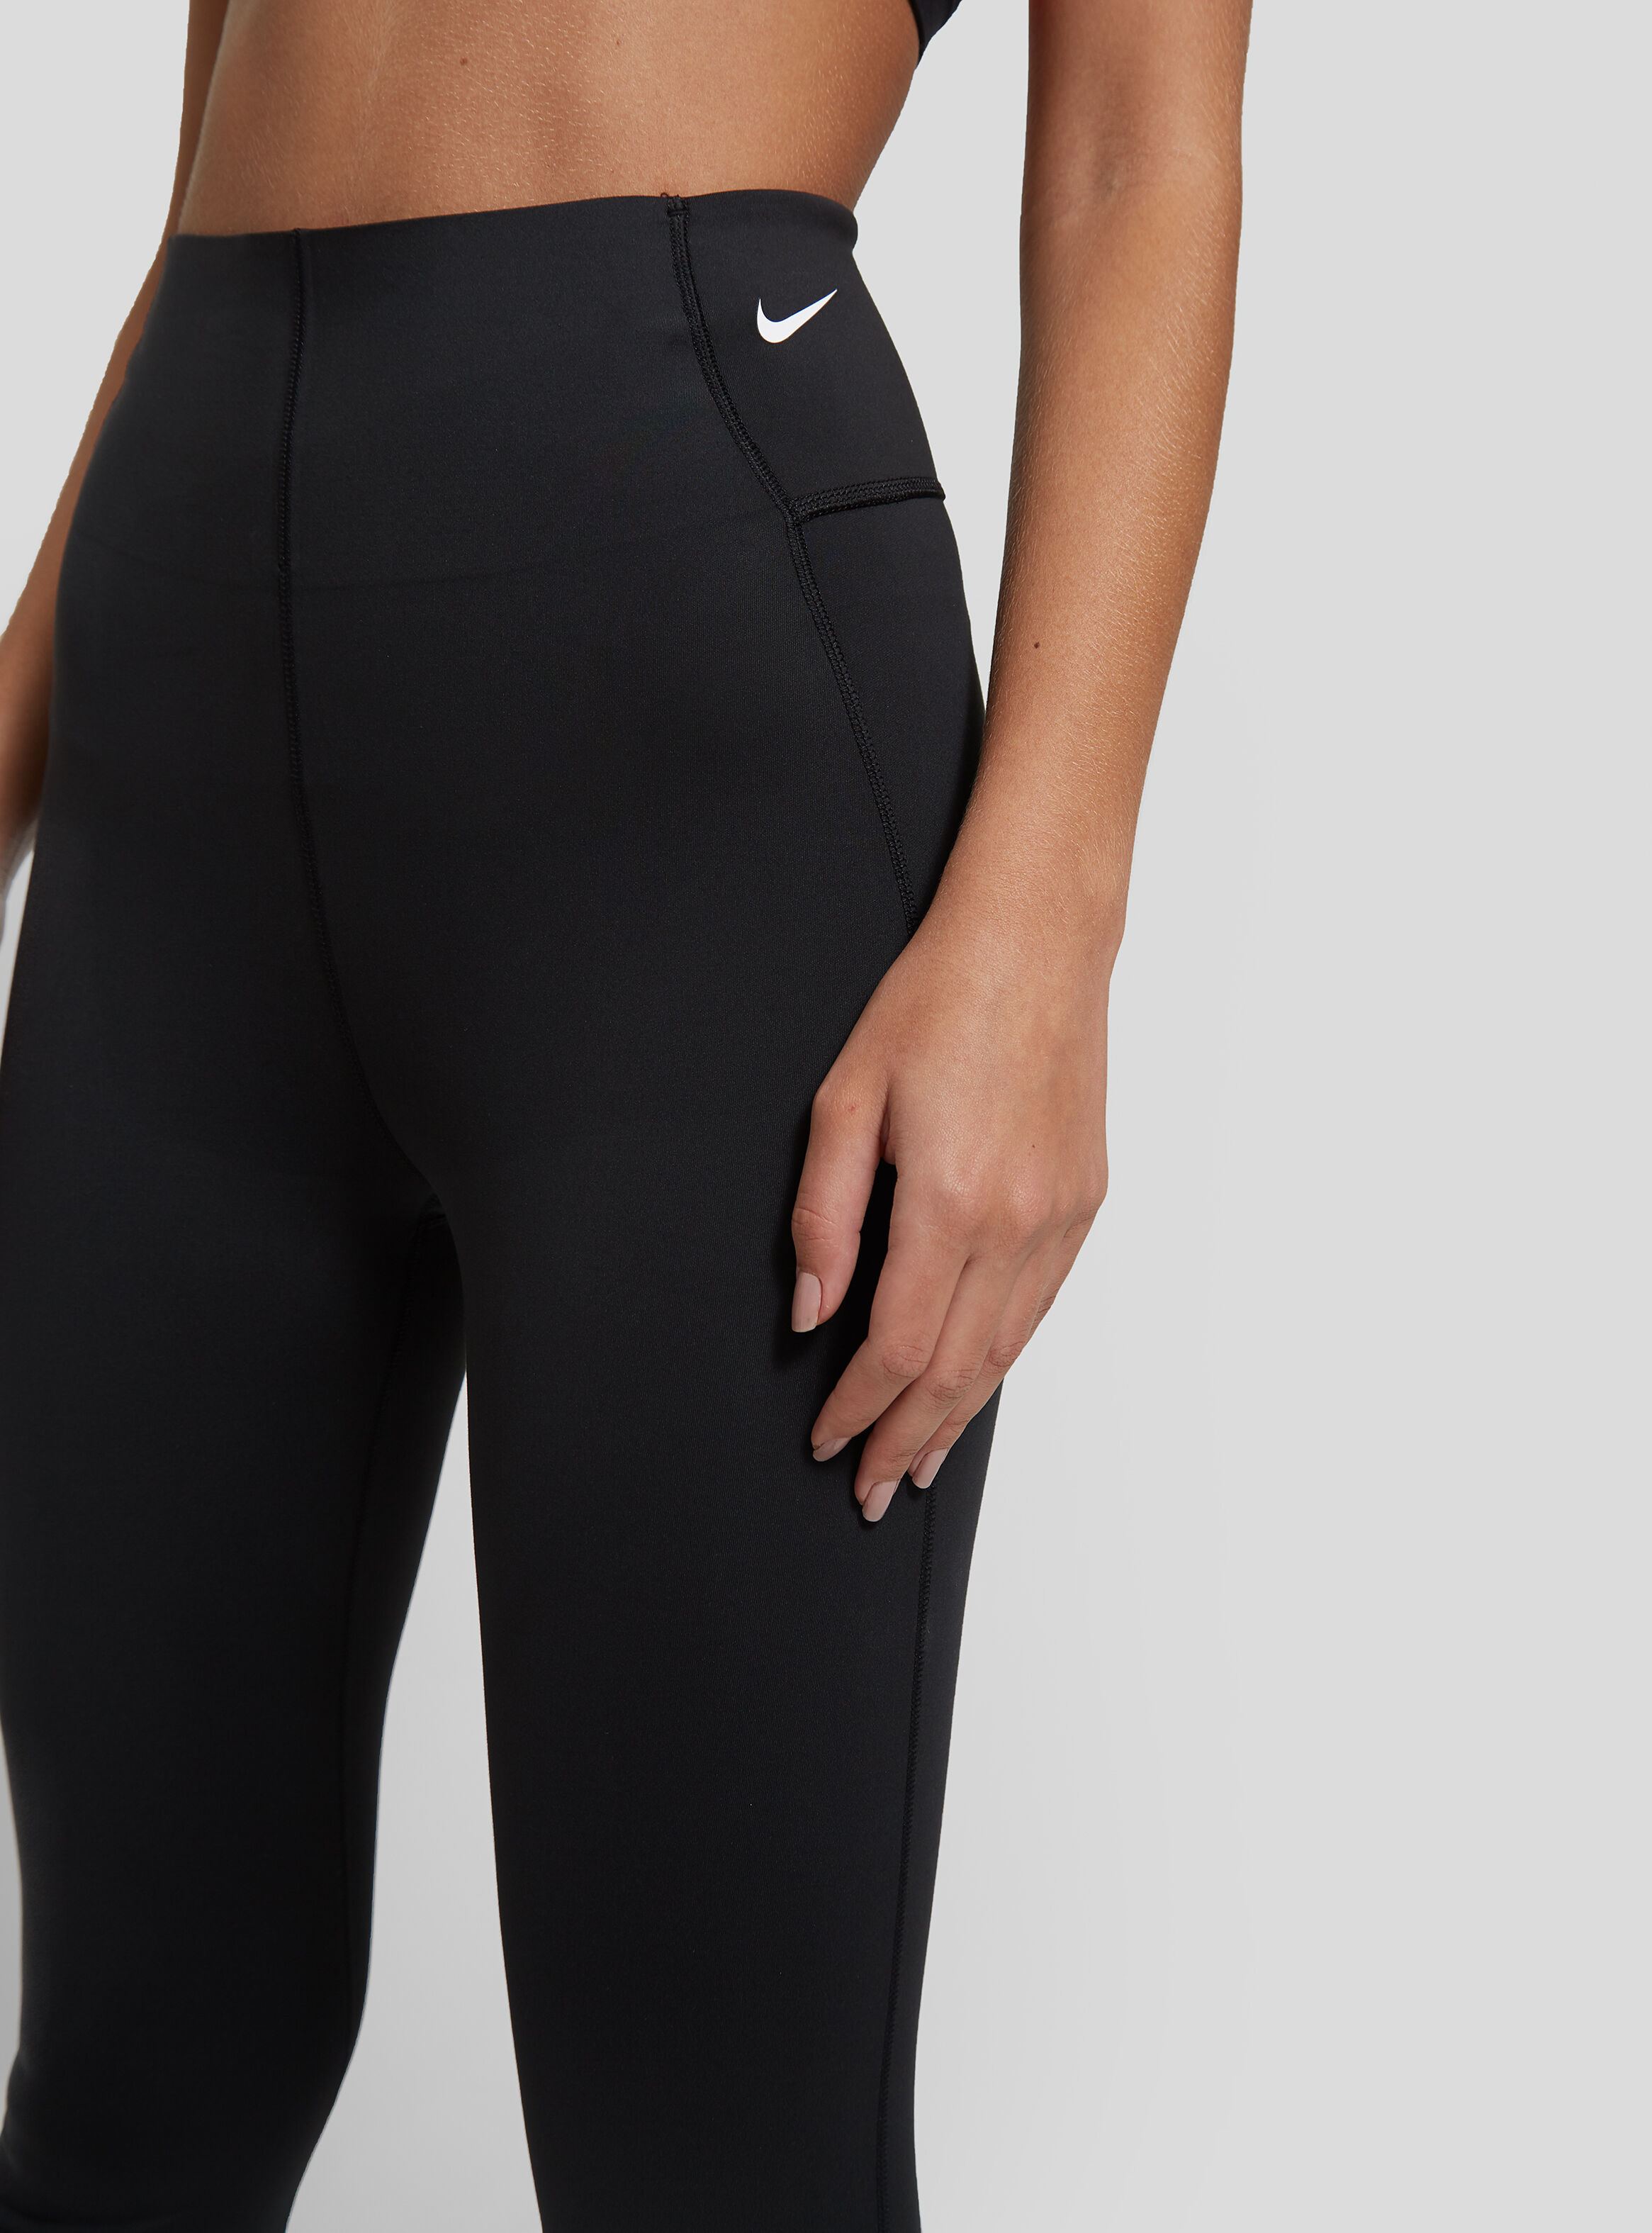 Calza Nike Scult Vctry Tght Mujer - Calzas y Pantalones | Paris.cl